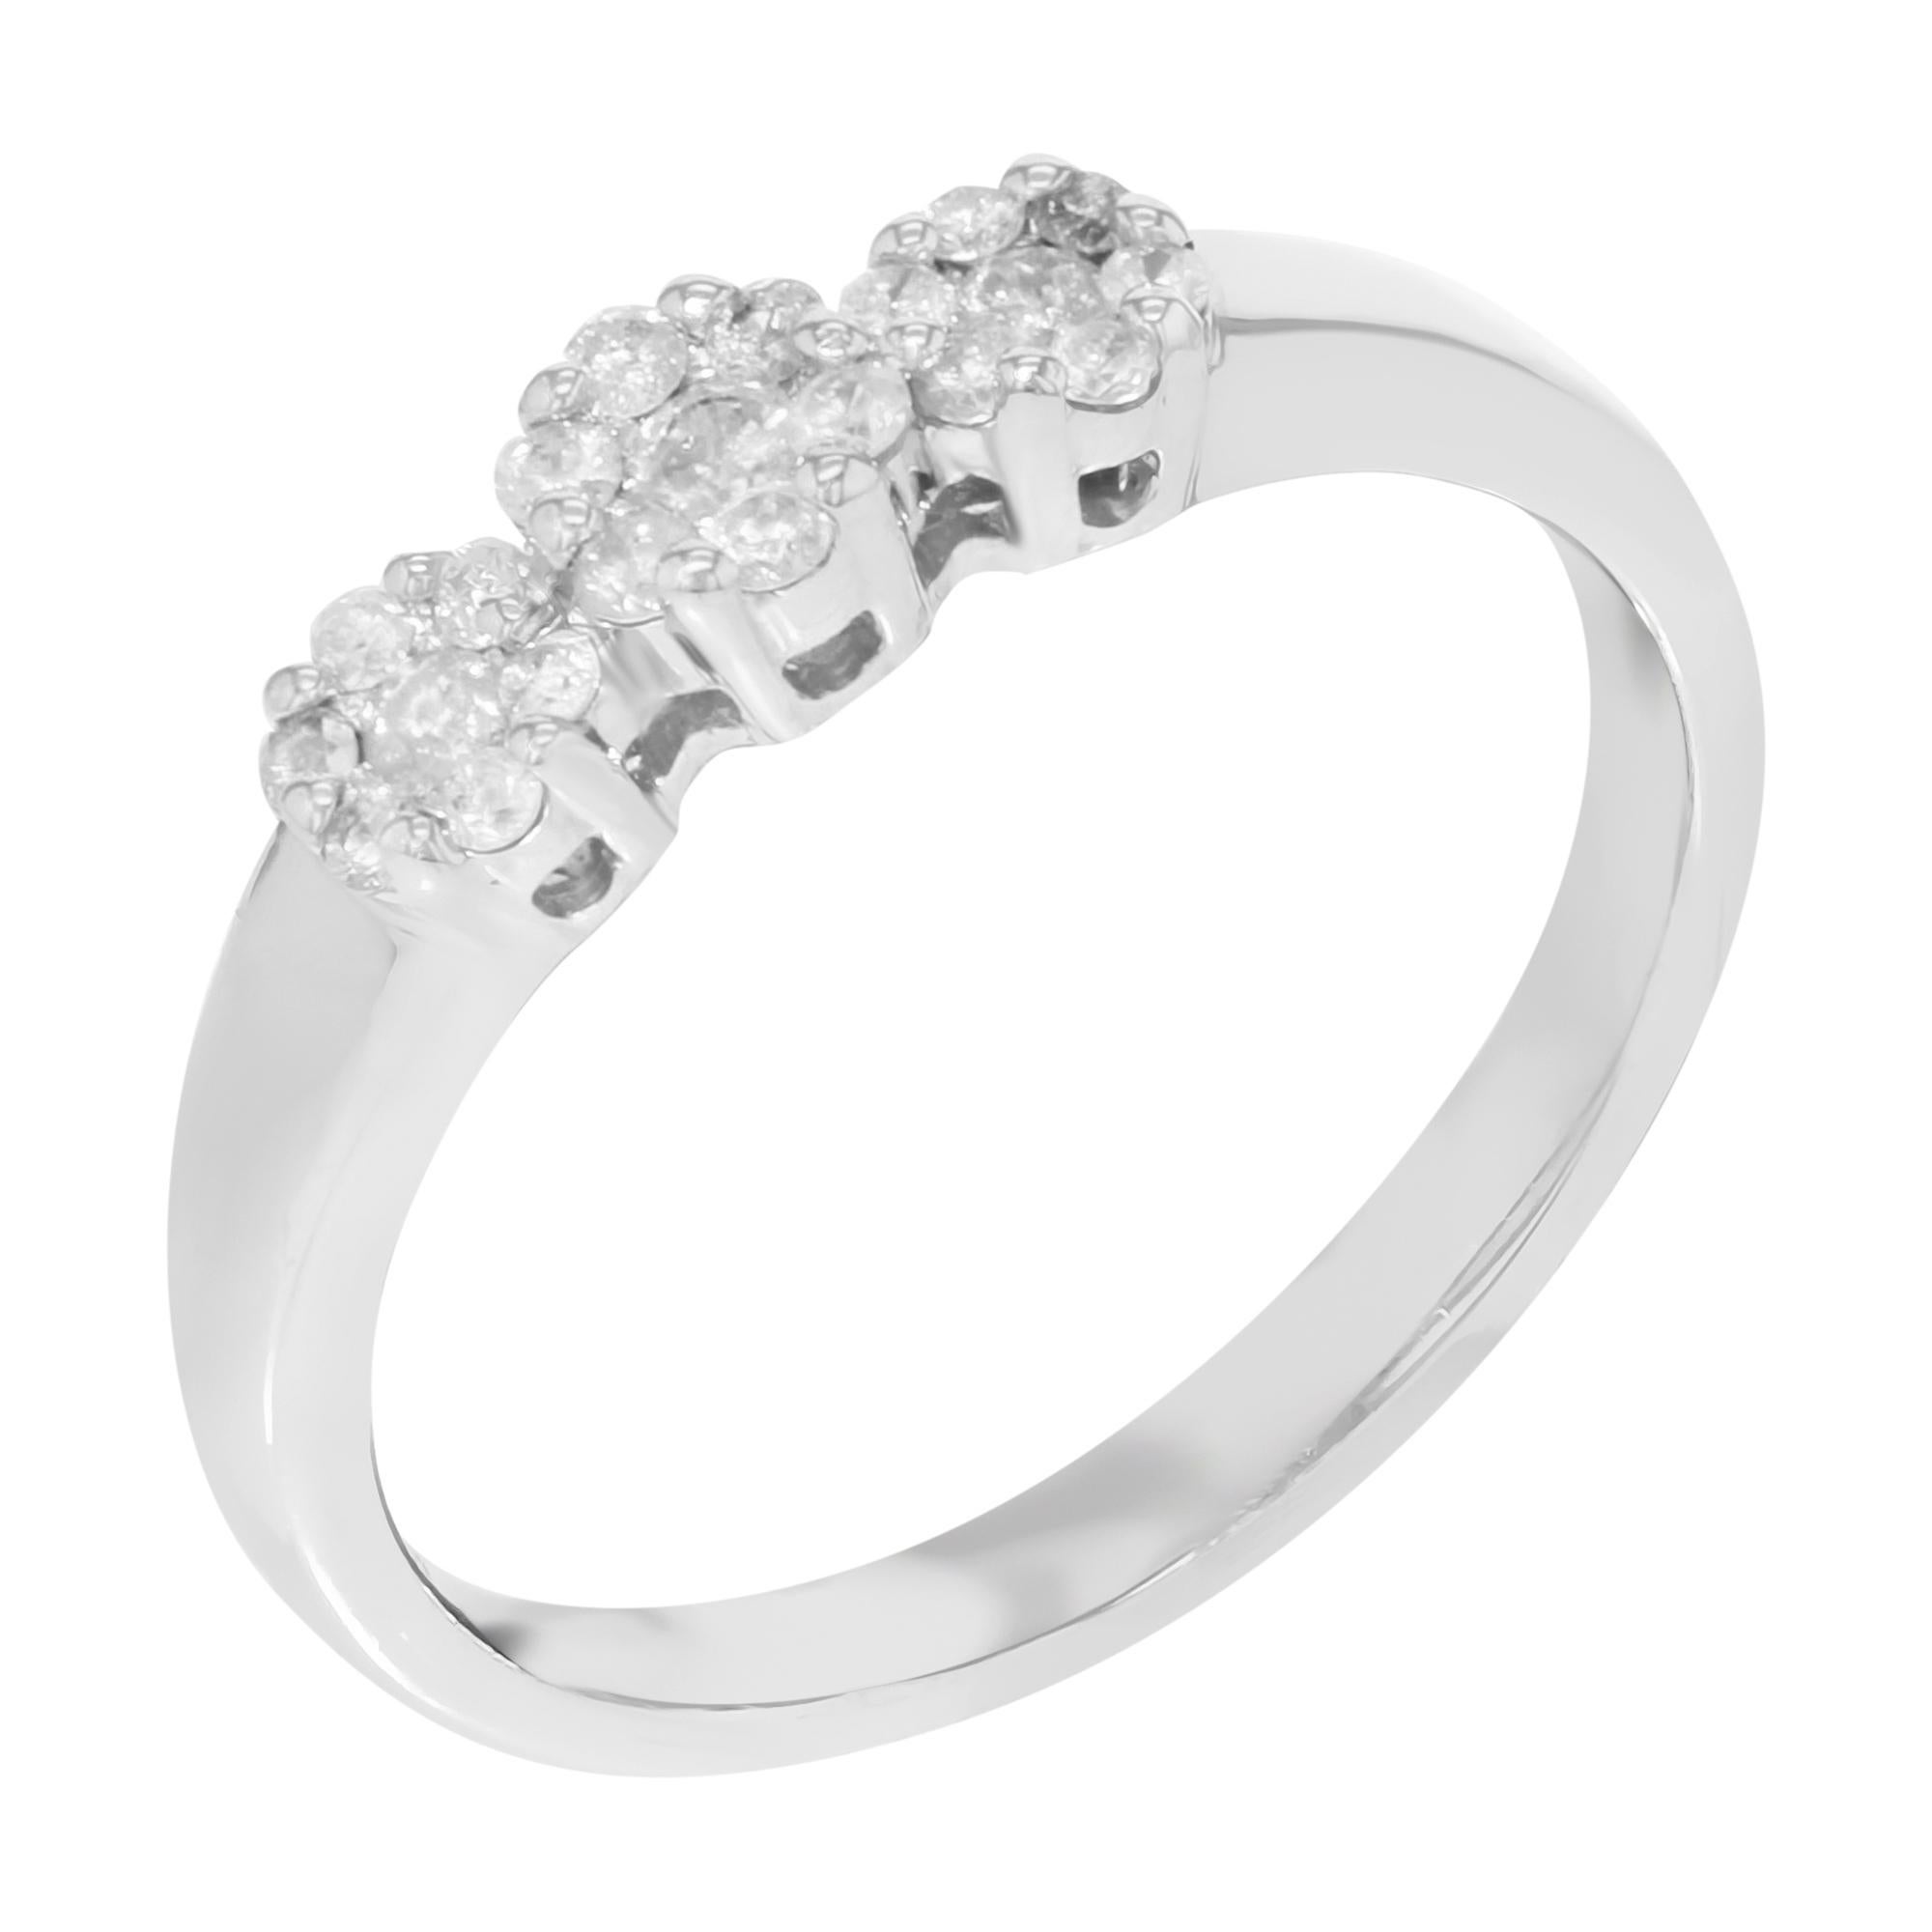 This diamond wedding band from our Rachel Koen Bridal Collection could be a great option to celebrate the day you exchange vows with the love of your life. The 14k white gold has been expertly polished to give it an immaculate sparkle. The diamonds